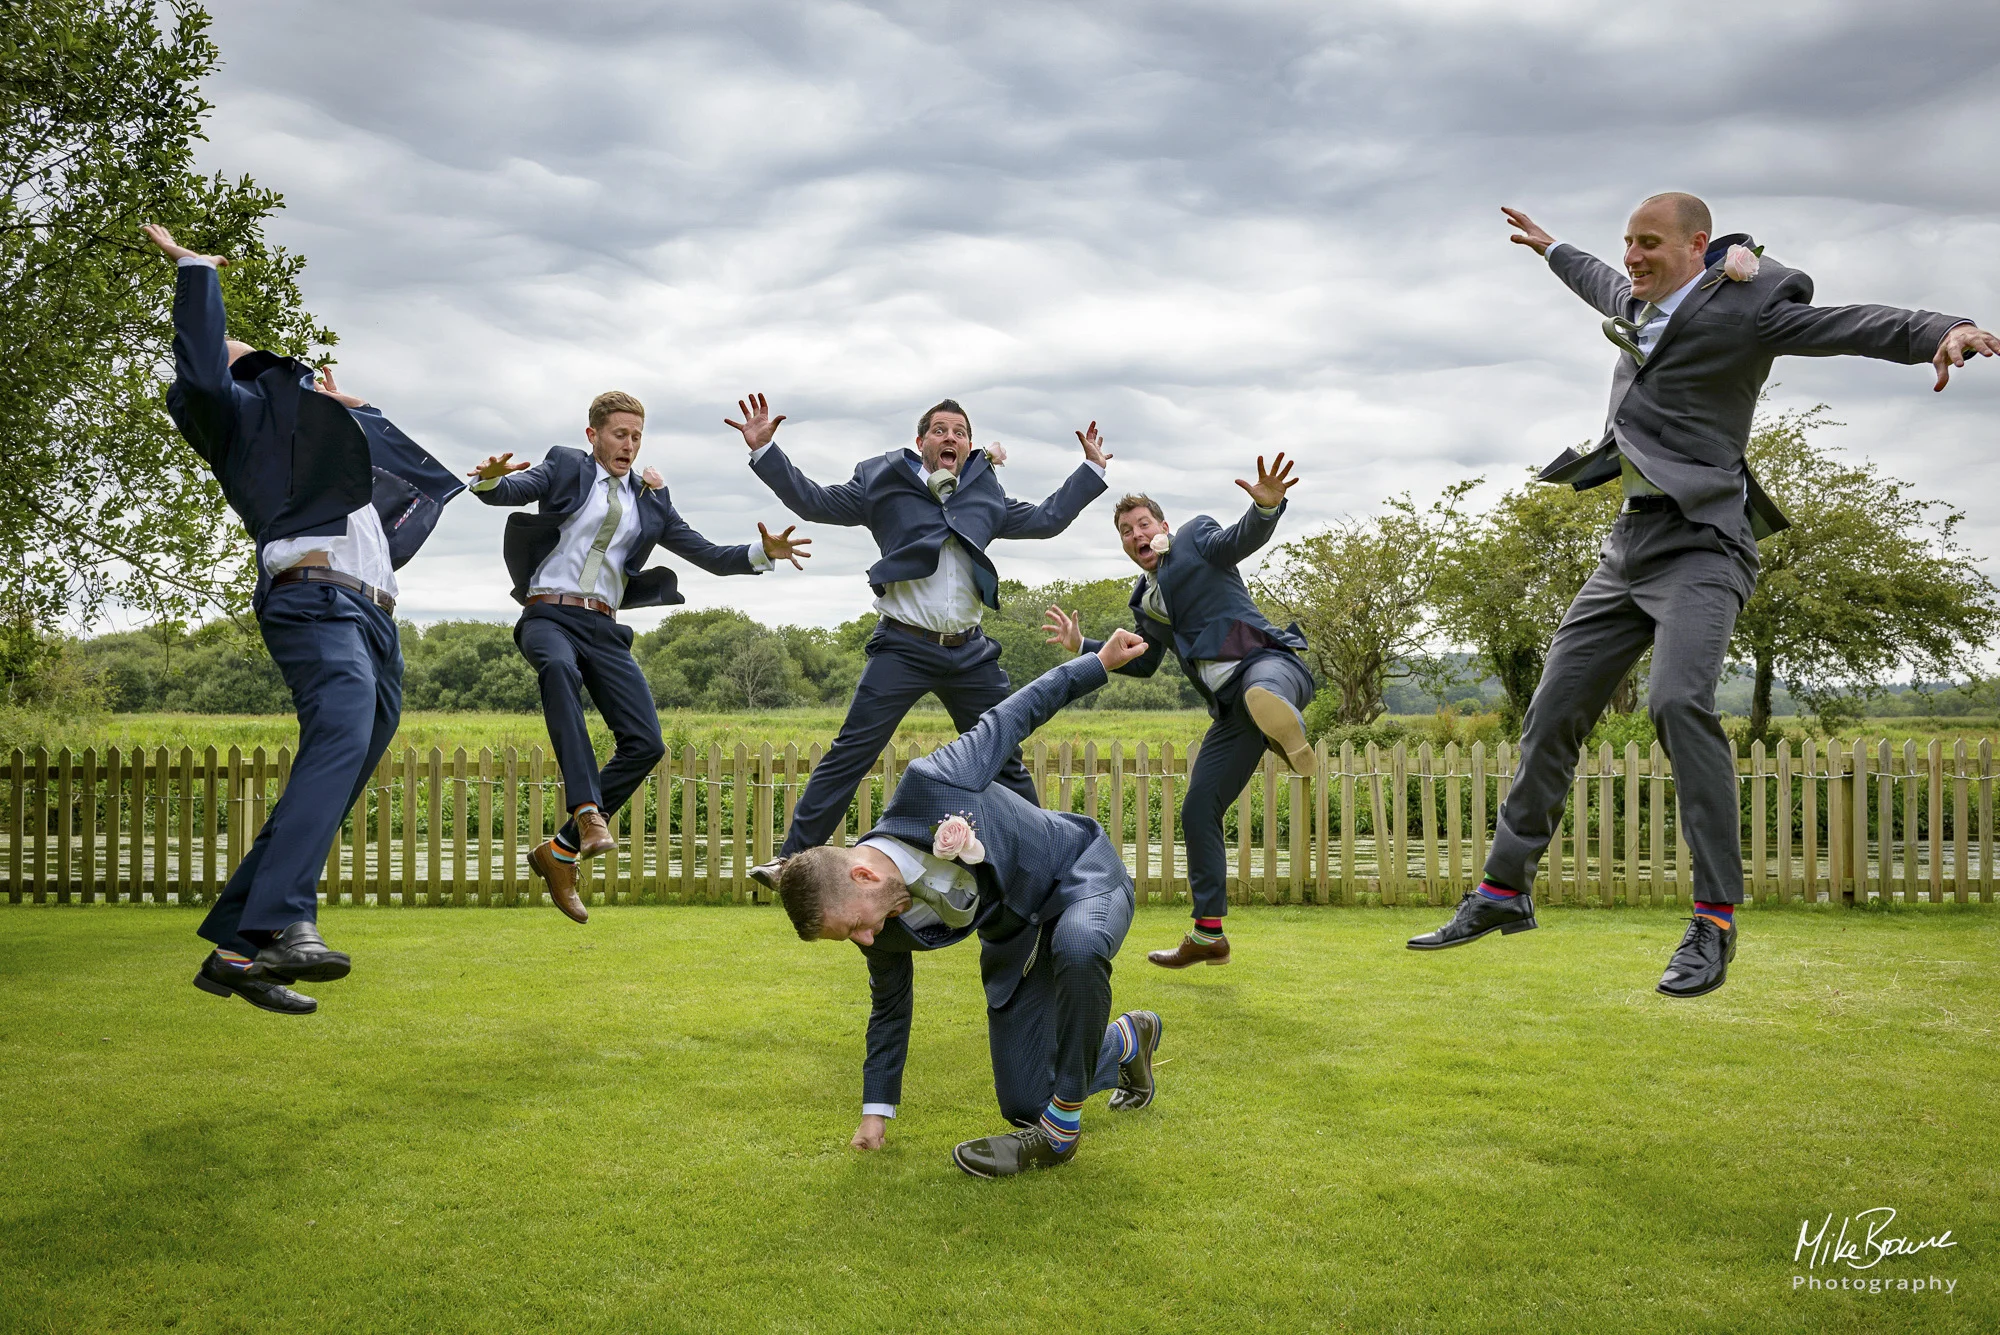 Bridegroom punching the ground as best men leap into the air around him